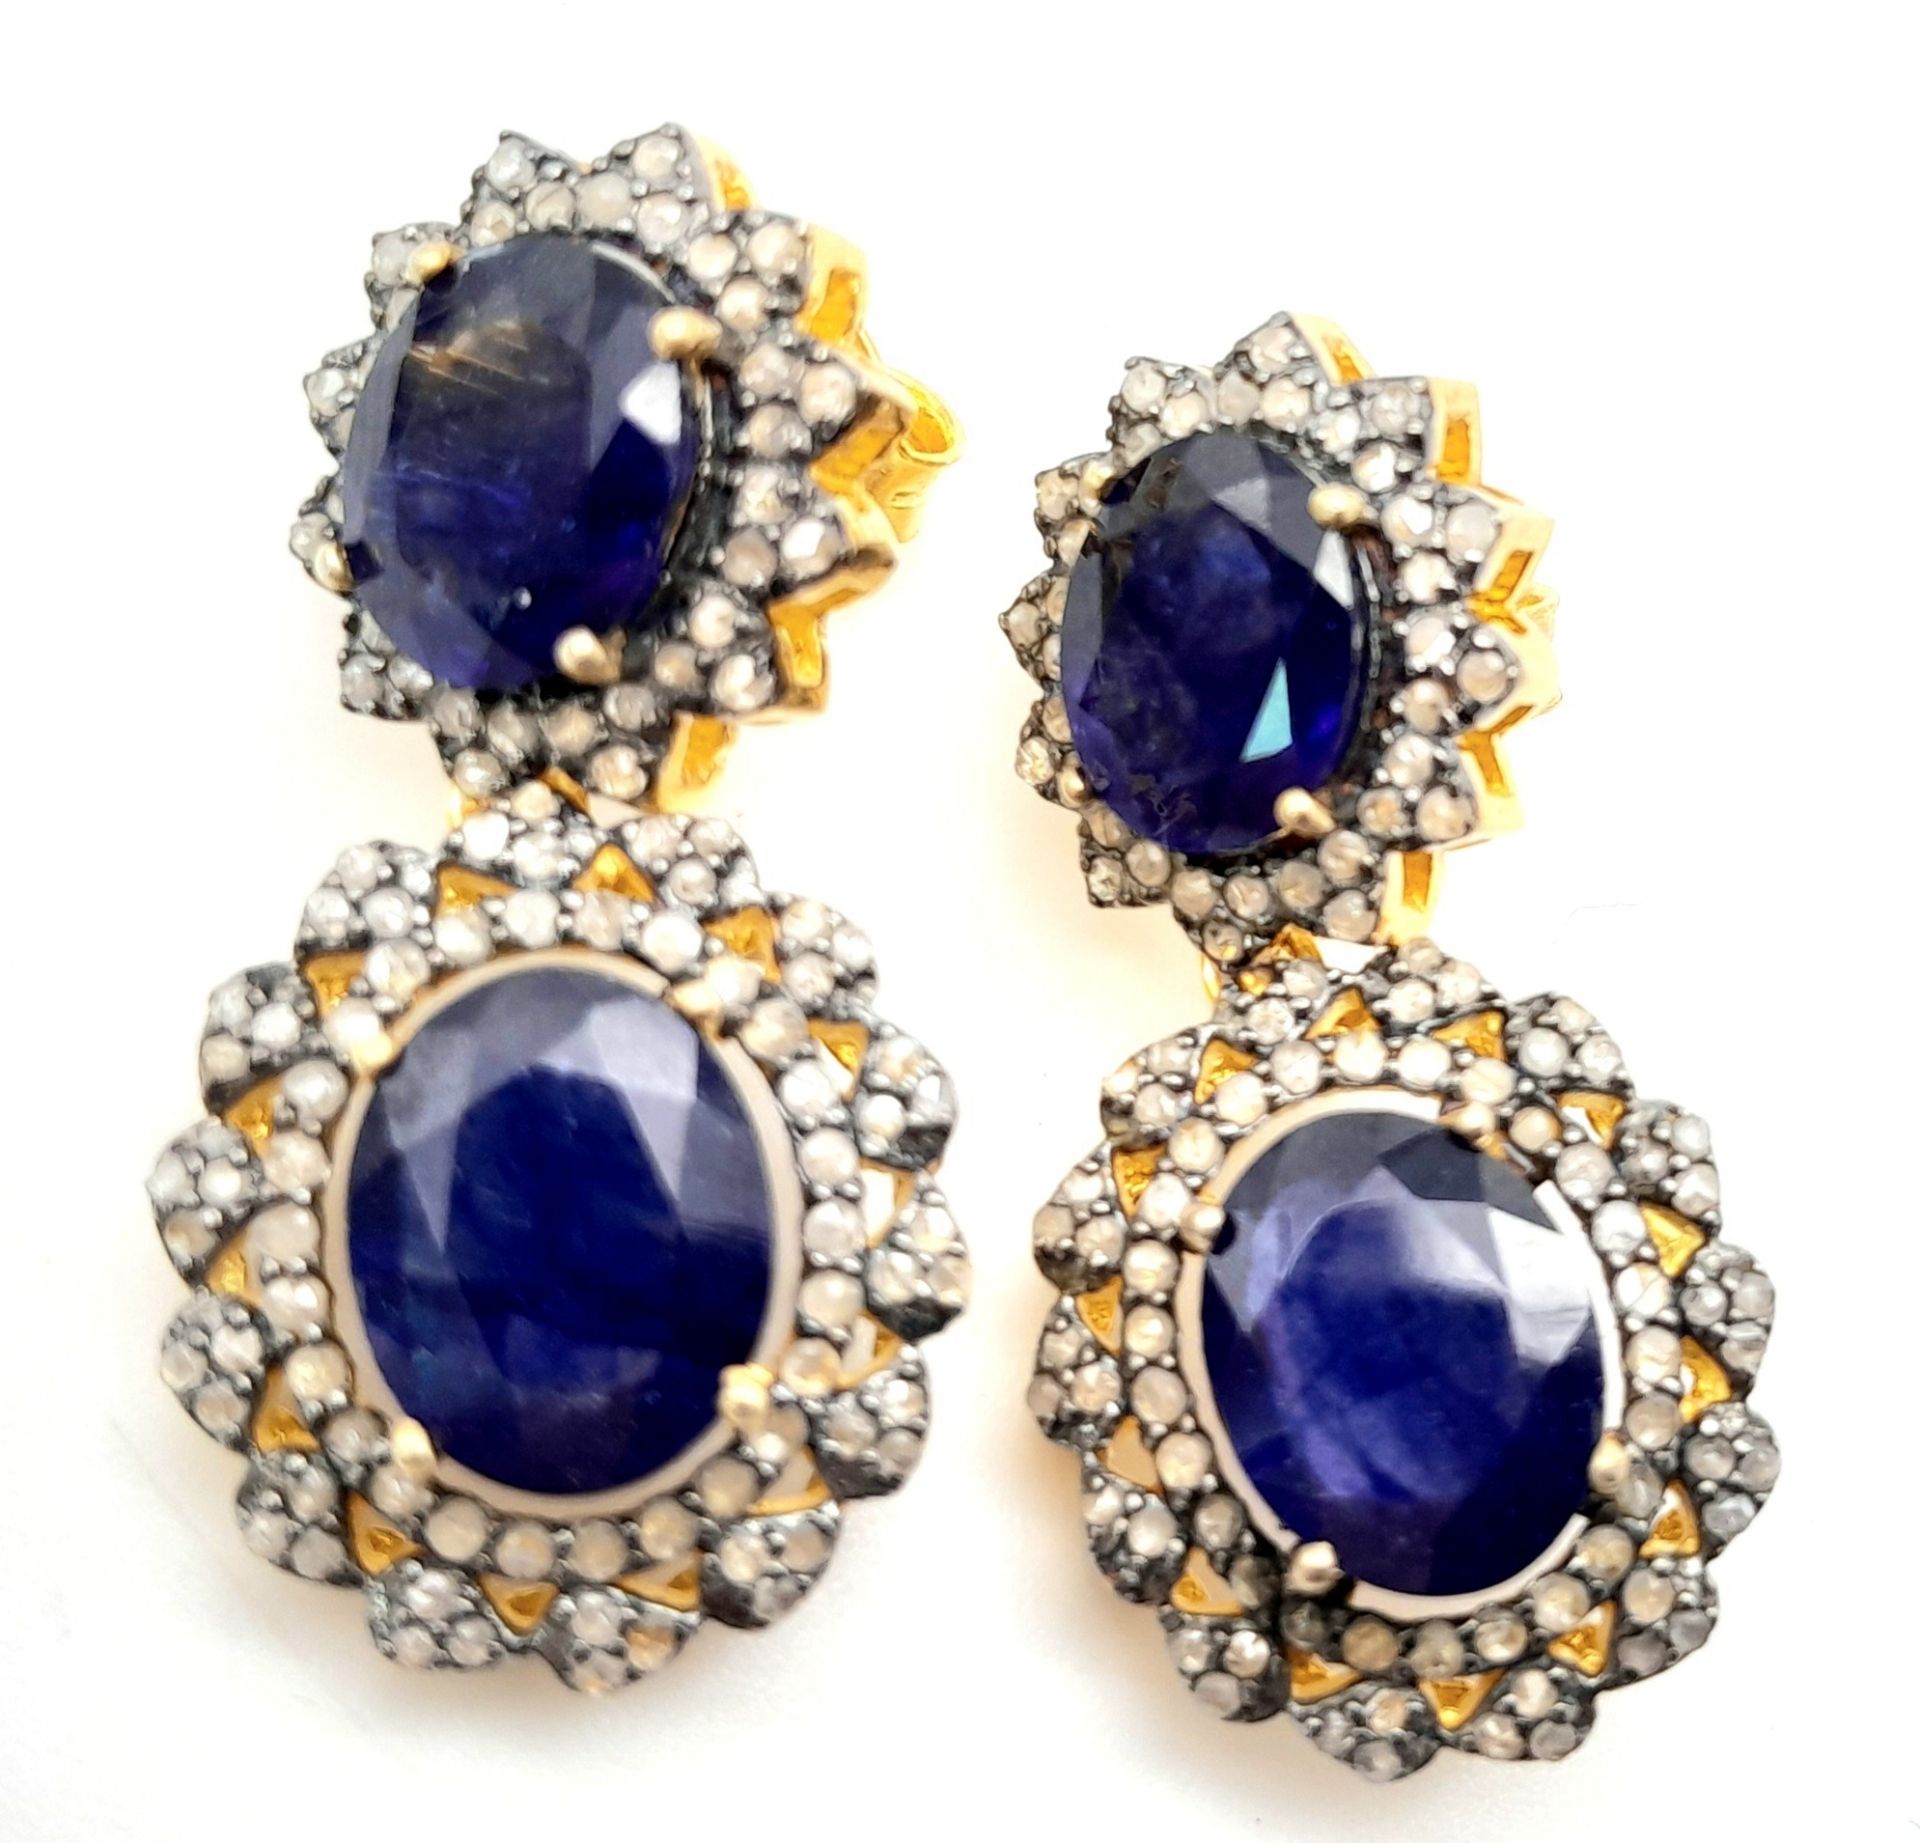 A Pair of Blue Sapphire Gemstone Drop Earrings with Diamond Surrounds. Set in gilded 925 Silver.